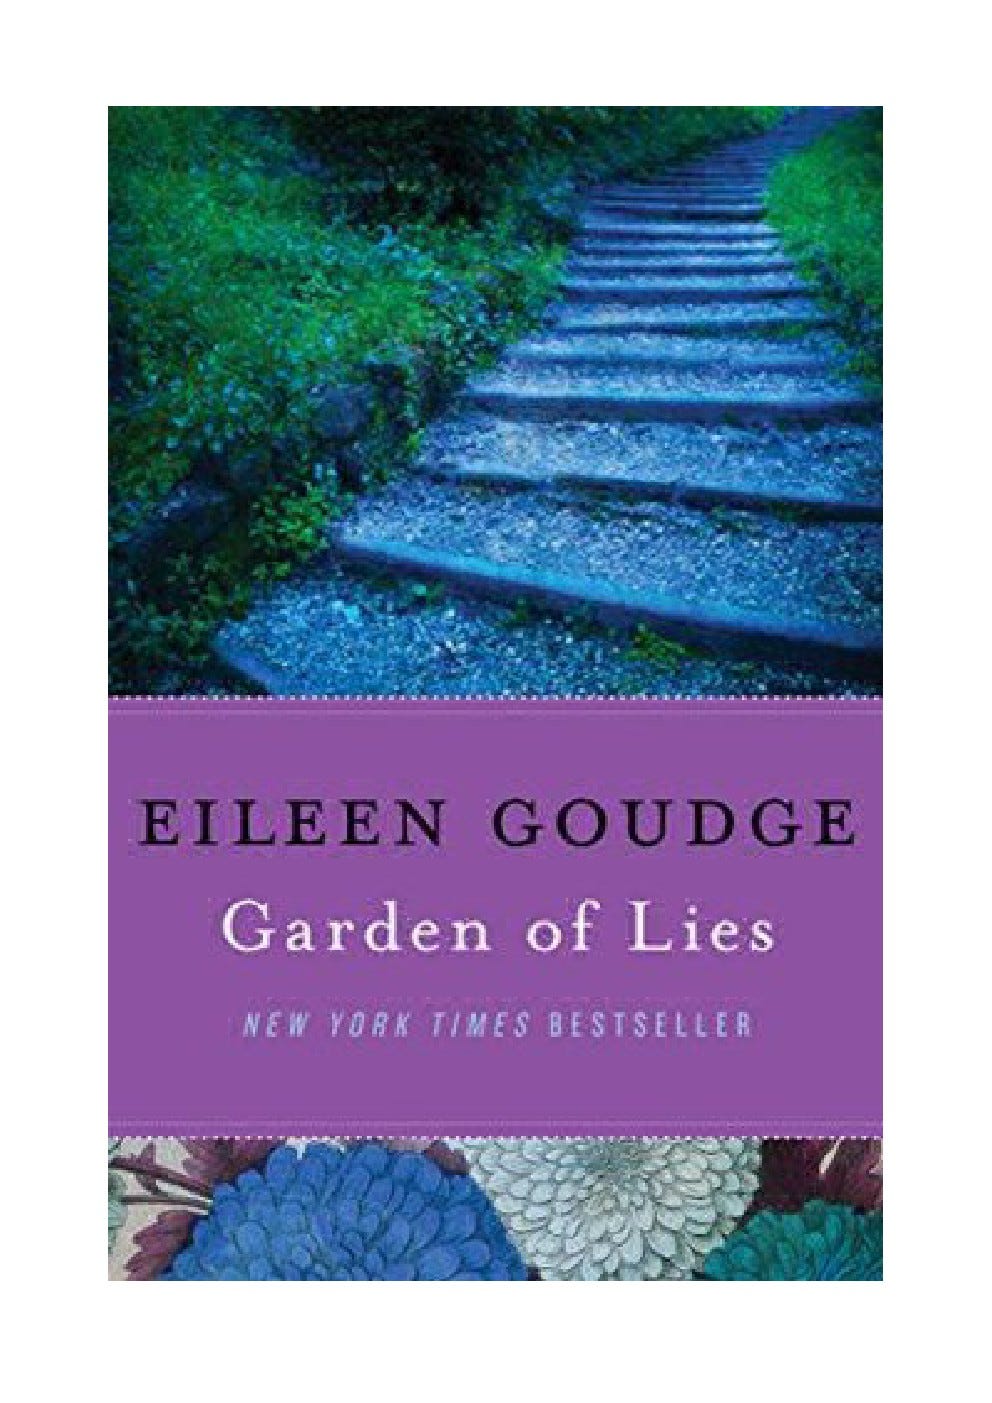 Have Garden Of Lies Garden Of Lies 1 By Eileen Goudge For Free